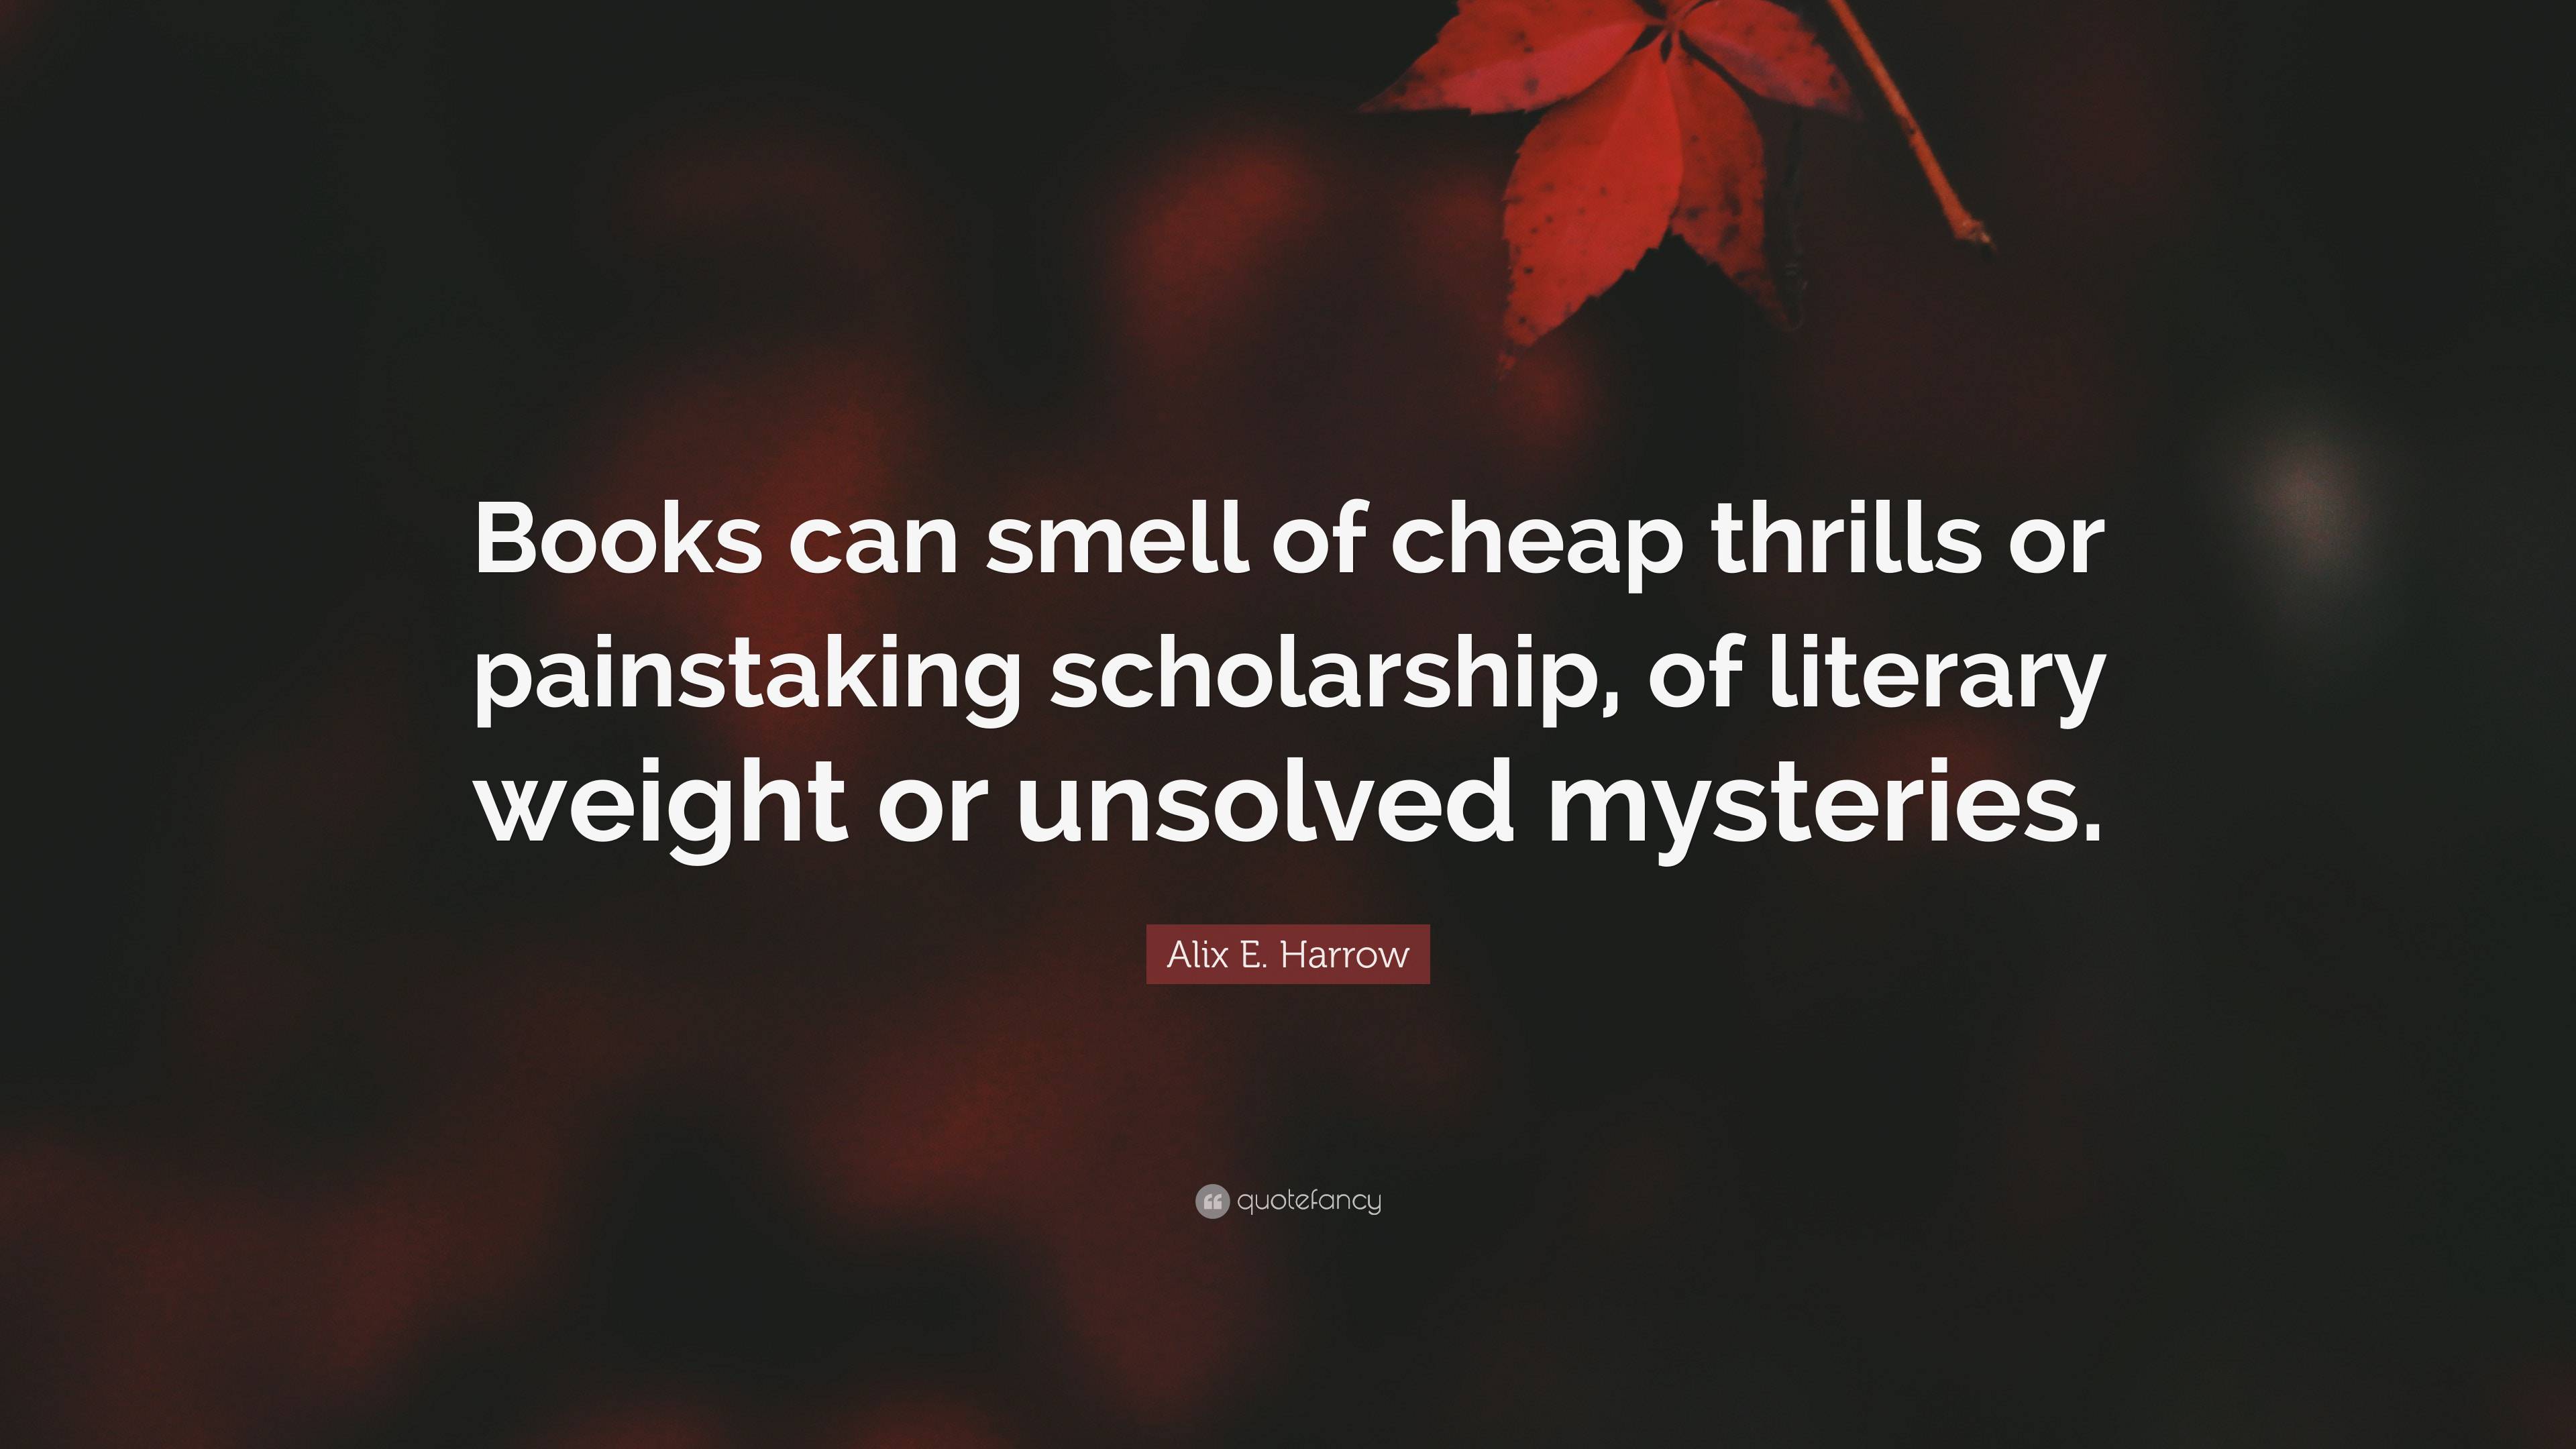 Alix E. Harrow Quote: “Books can smell of cheap thrills or painstaking ...